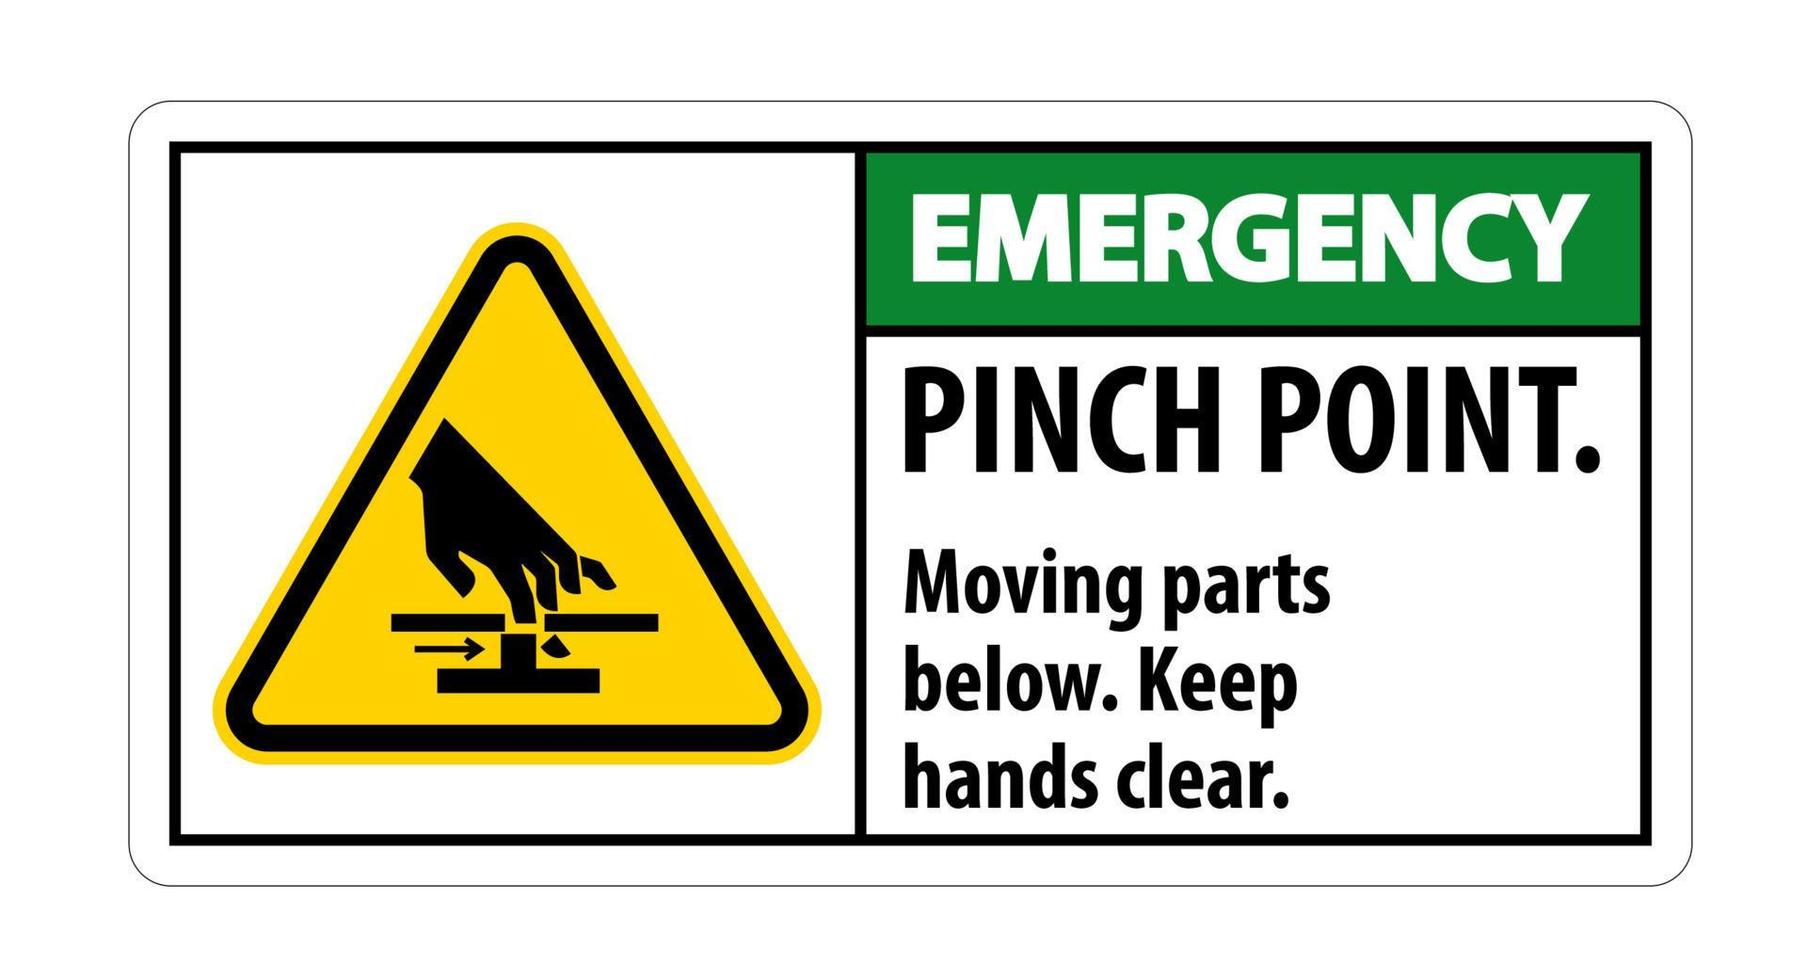 Emergency Pinch Point, Moving Parts Below, Keep Hands Clear Symbol Sign Isolate on White Background,Vector Illustration EPS.10 vector